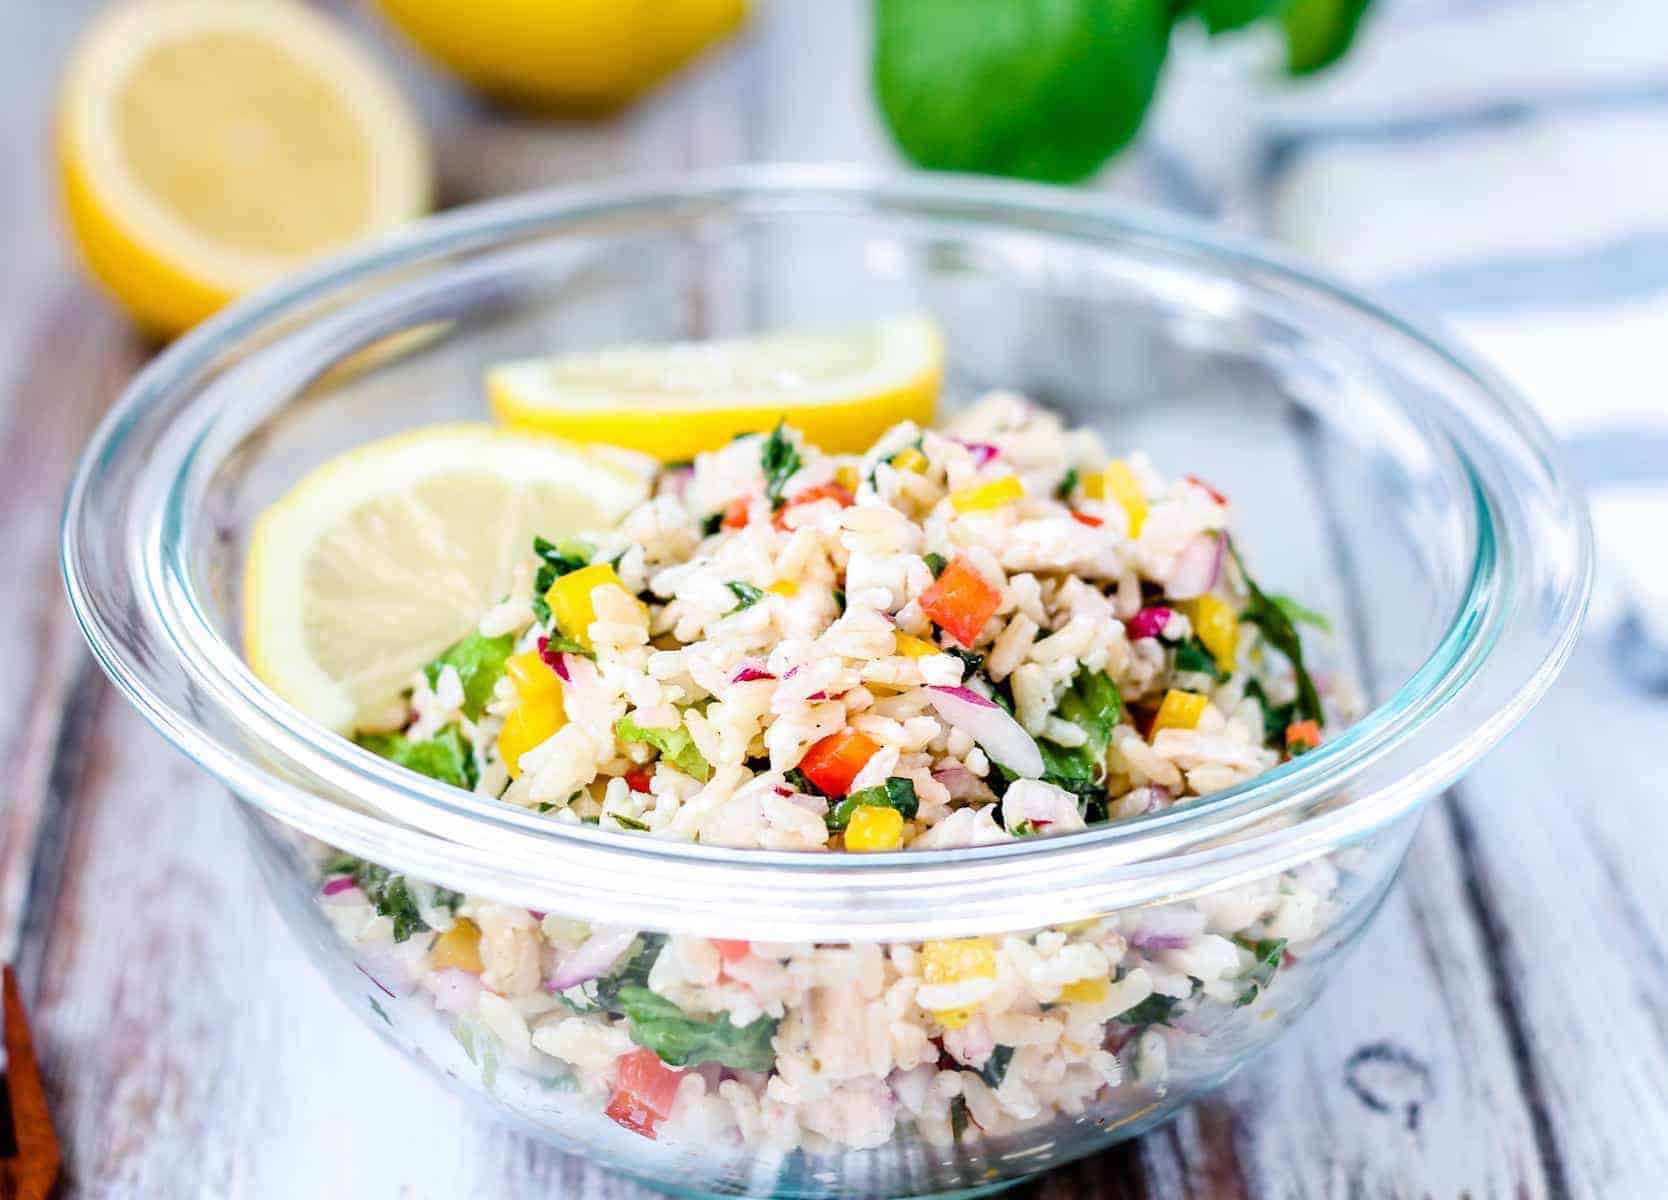 A bowl of rice salad with lemon and lemon wedges.